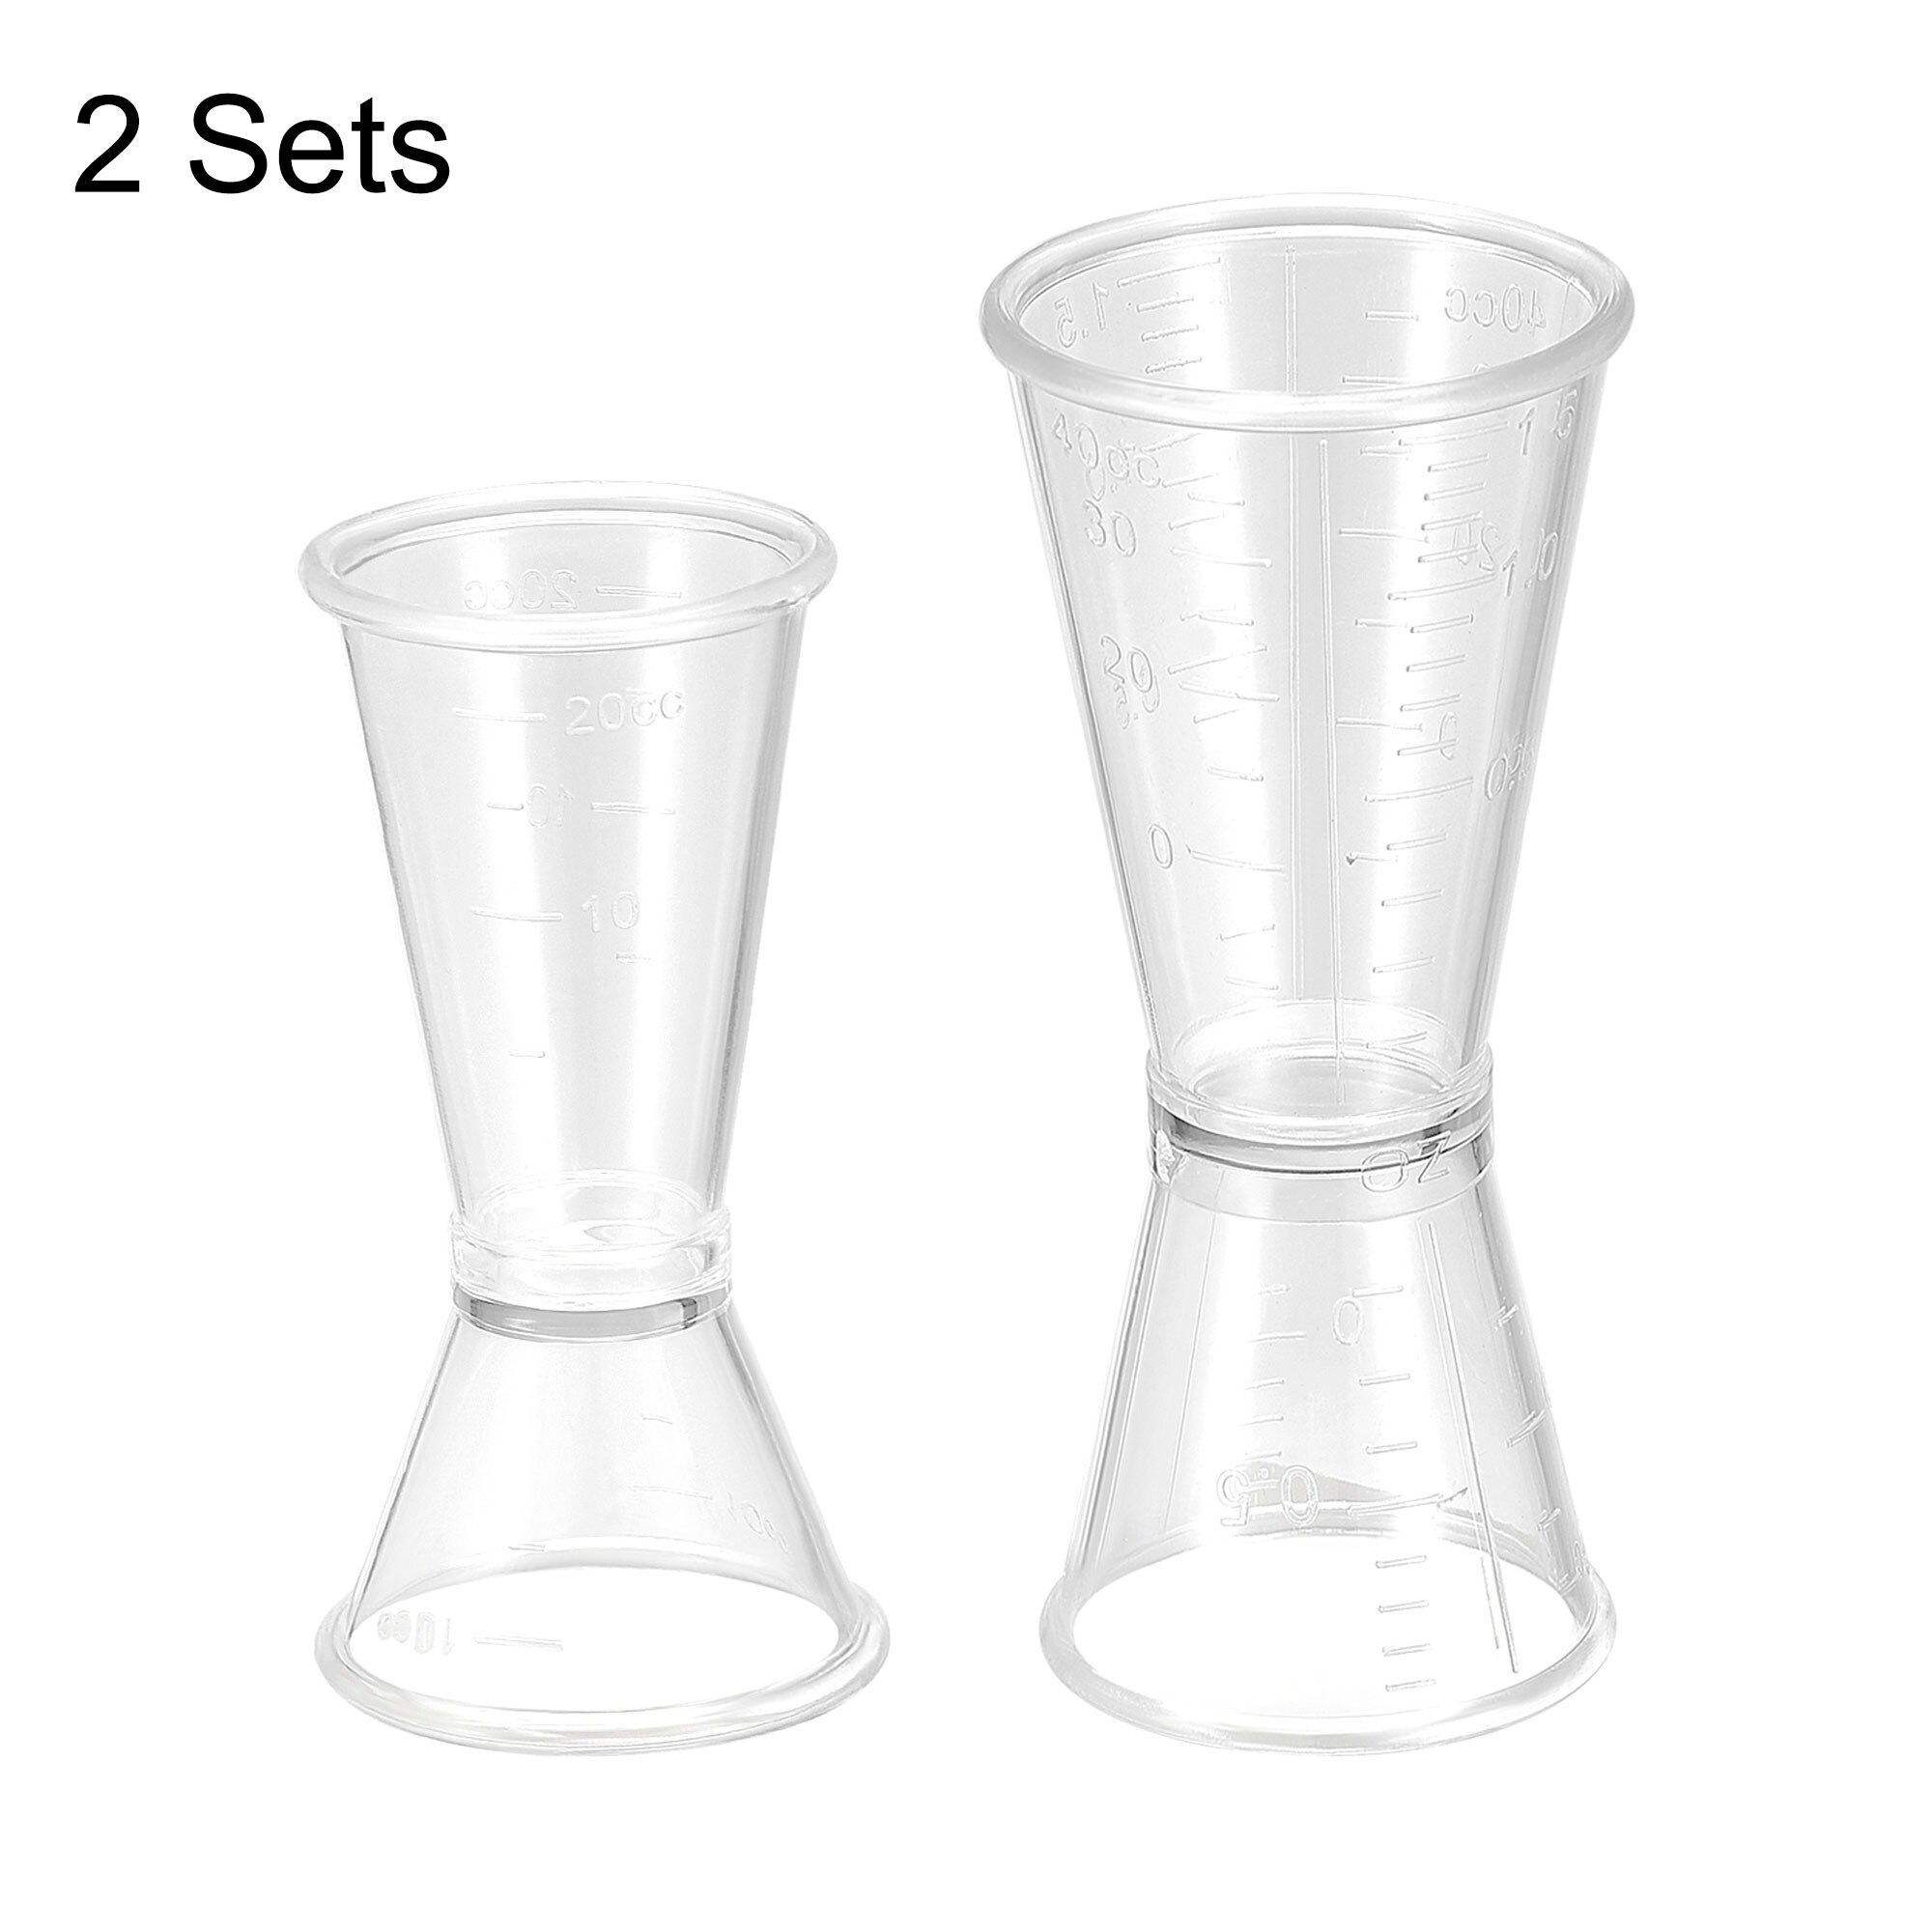 https://ak1.ostkcdn.com/images/products/is/images/direct/0bf2c71b780e790779cbd7eb0680728322146280/Measuring-Cup-20ml-10ml%2C-40ml-20ml%2C-PC-Plastic-Double-Head-Beaker-4in2-Sets.jpg